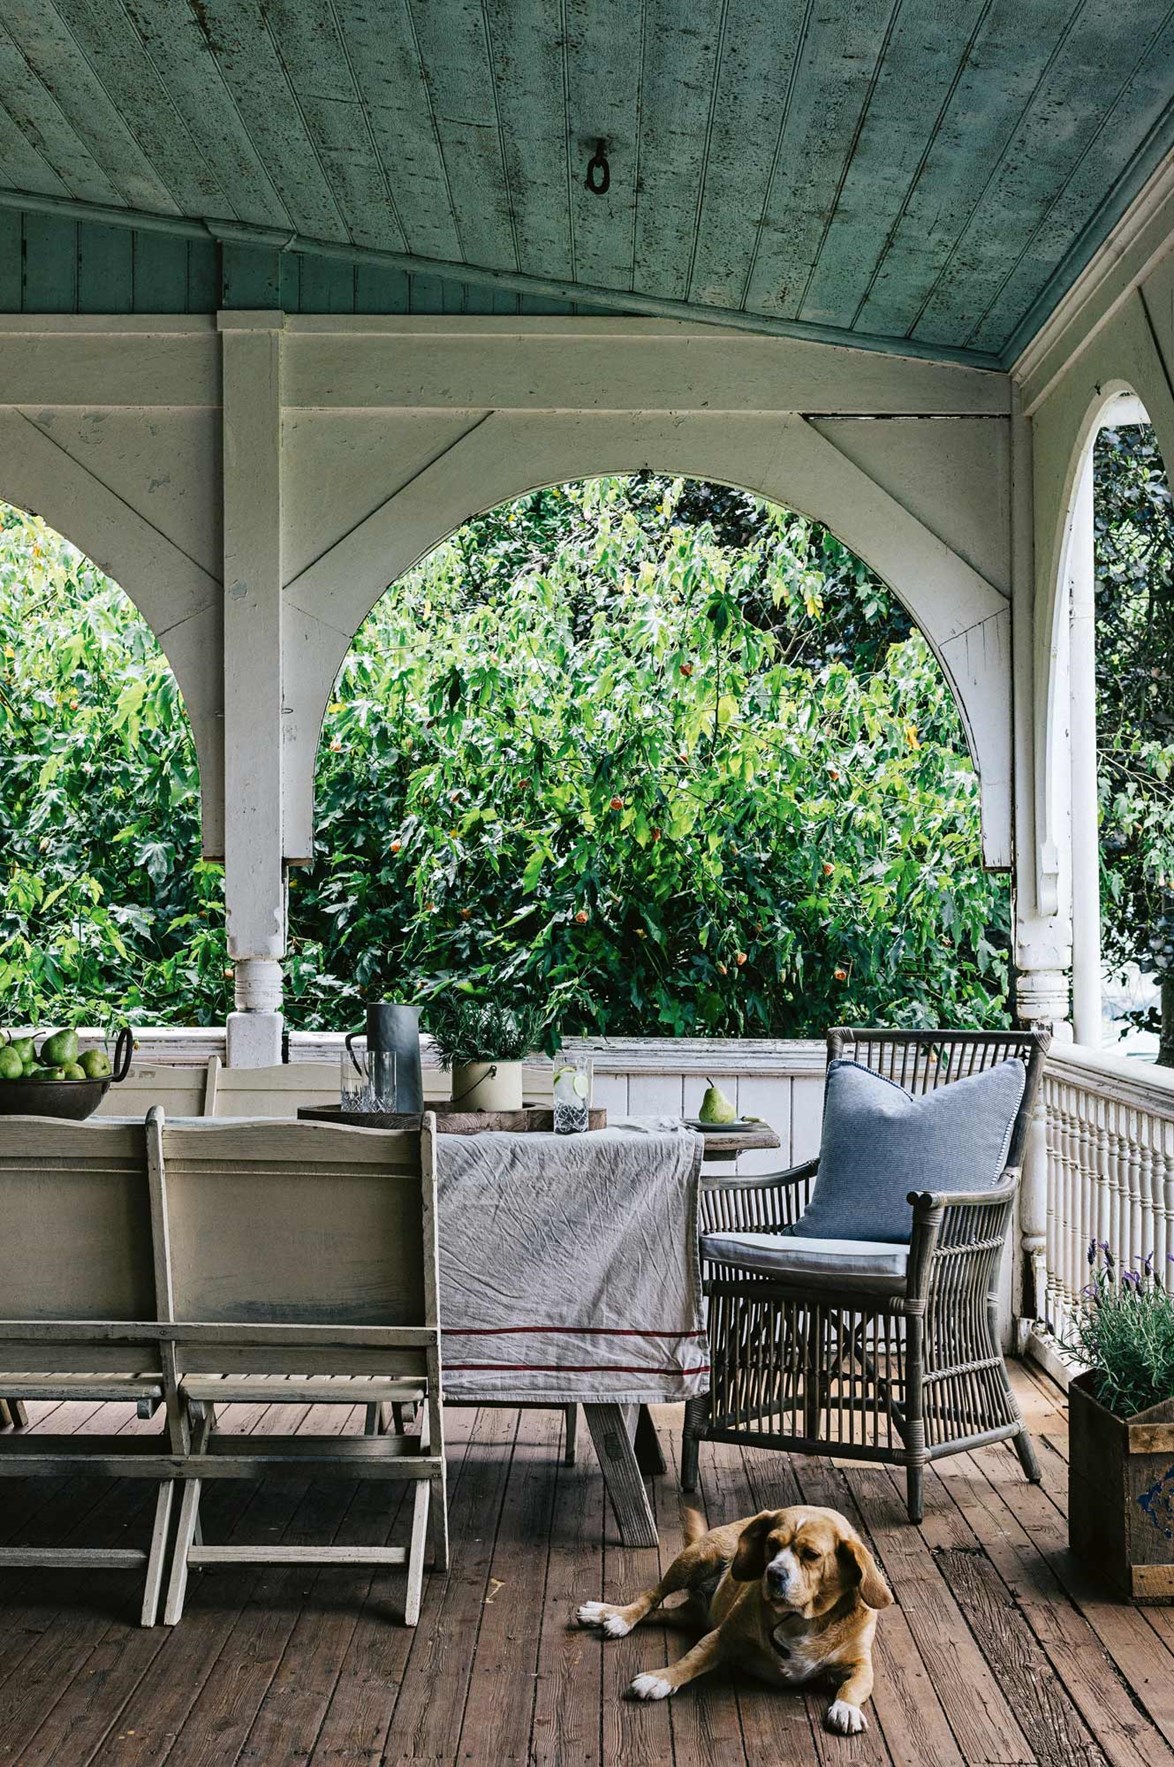 Views of greenery can be enjoyed while dining out on this spacious verandah. It's a spot that Maisy the dog enjoys too. The homestead, known as [Mount Koroite](https://www.homestolove.com.au/welcoming-family-homestead-near-coleraine-victoria-13987|target="_blank"), was built in the mid-19th century and features Queen Anne style details. *Photo: Marnie Hawson *